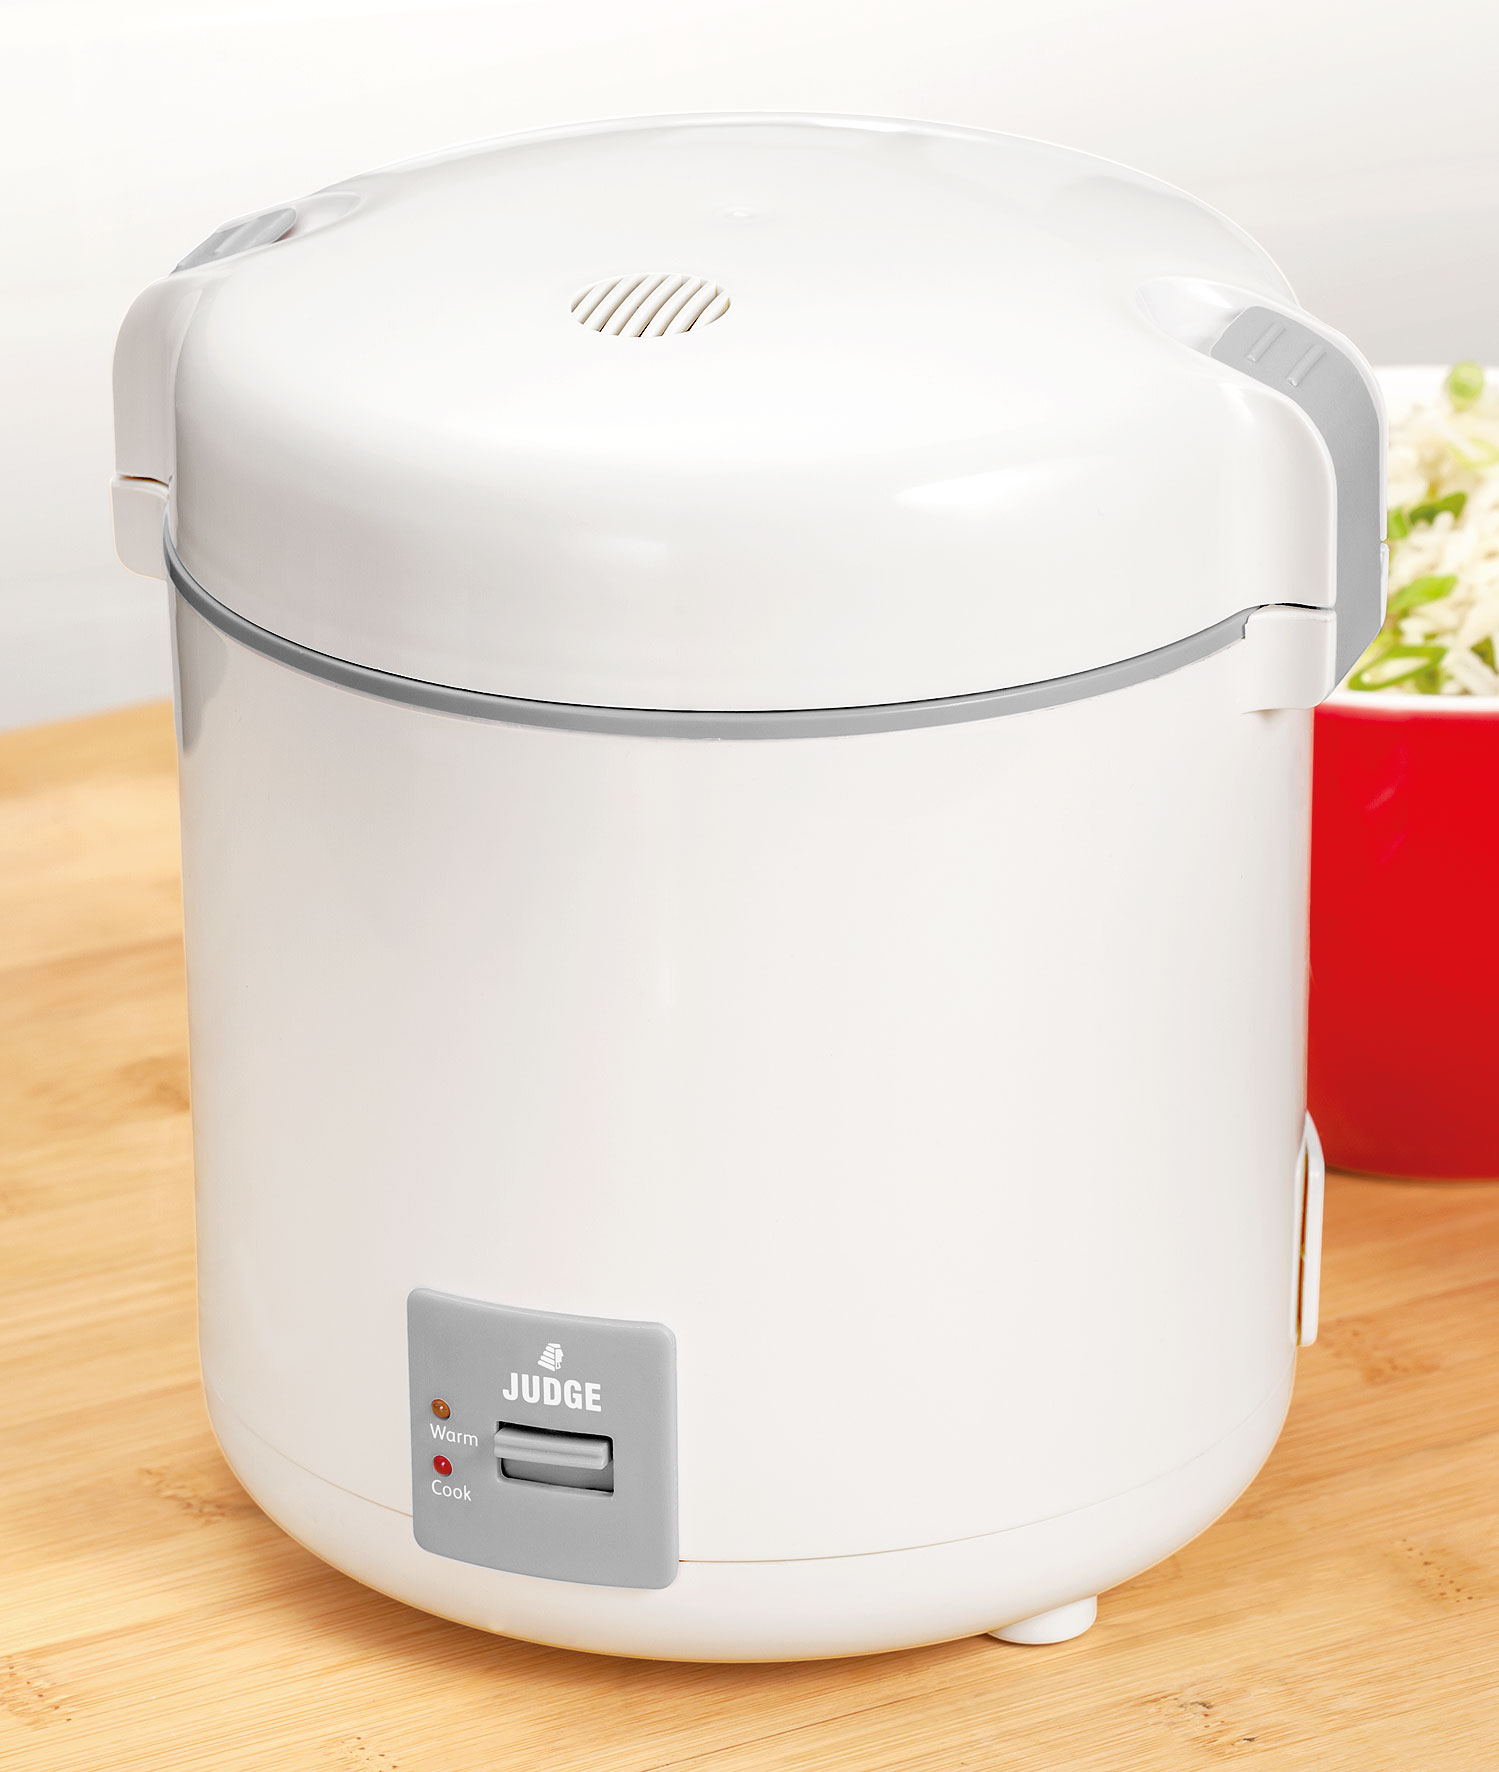 JUDGE TWO PORTION RICE COOKER - Woodbridge Kitchen Company